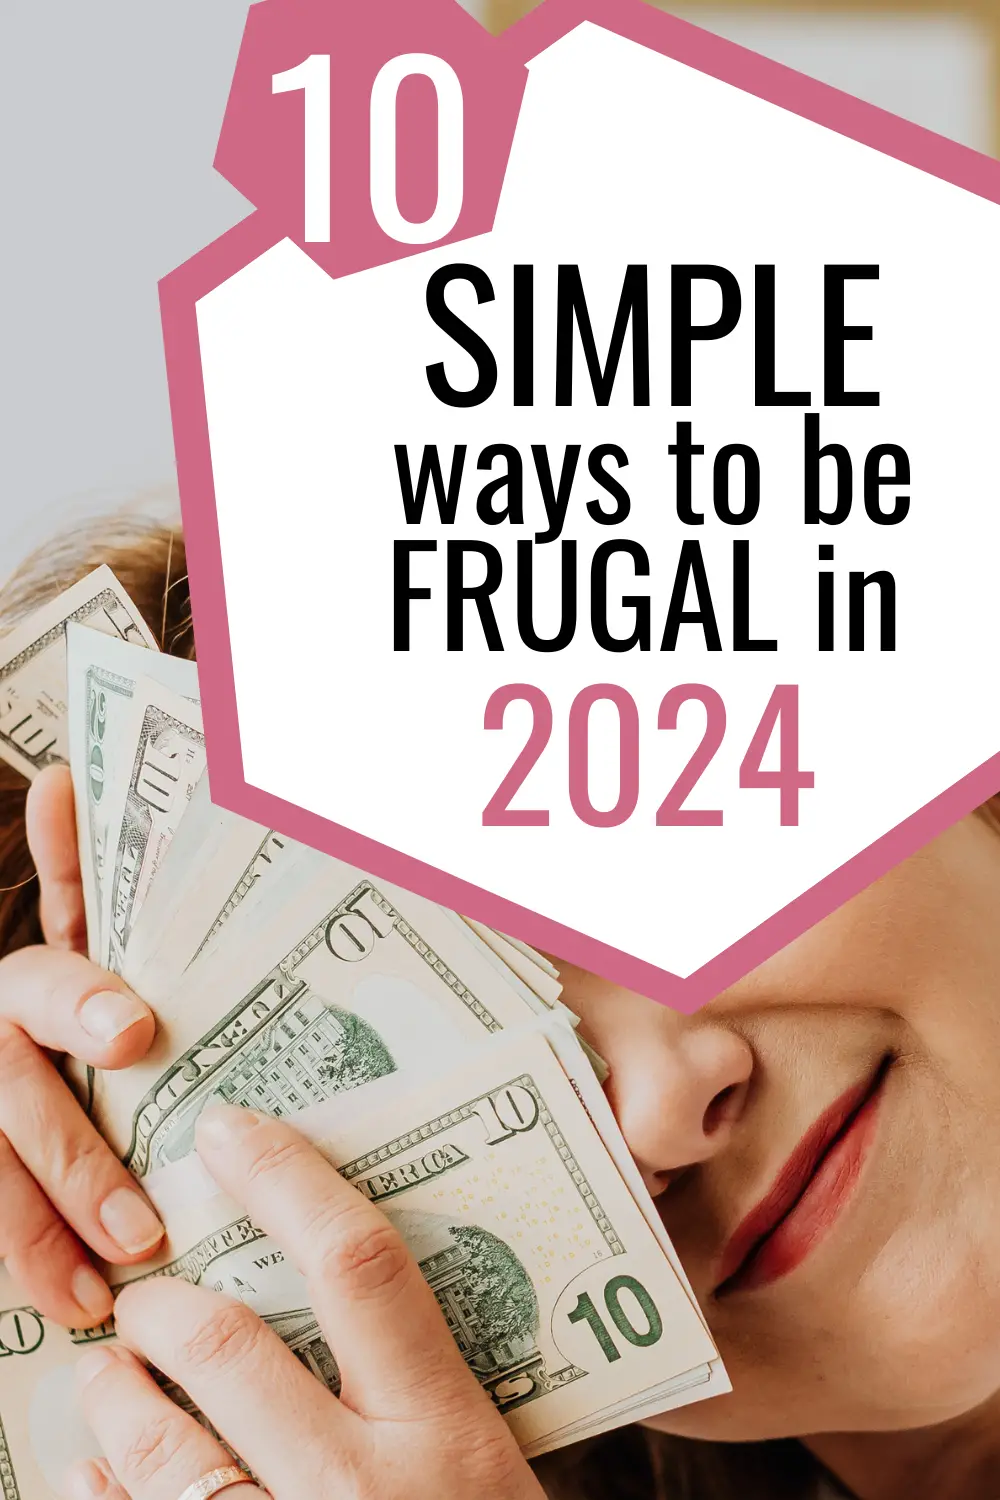 10 Simple Ways to be More Frugal in 2024